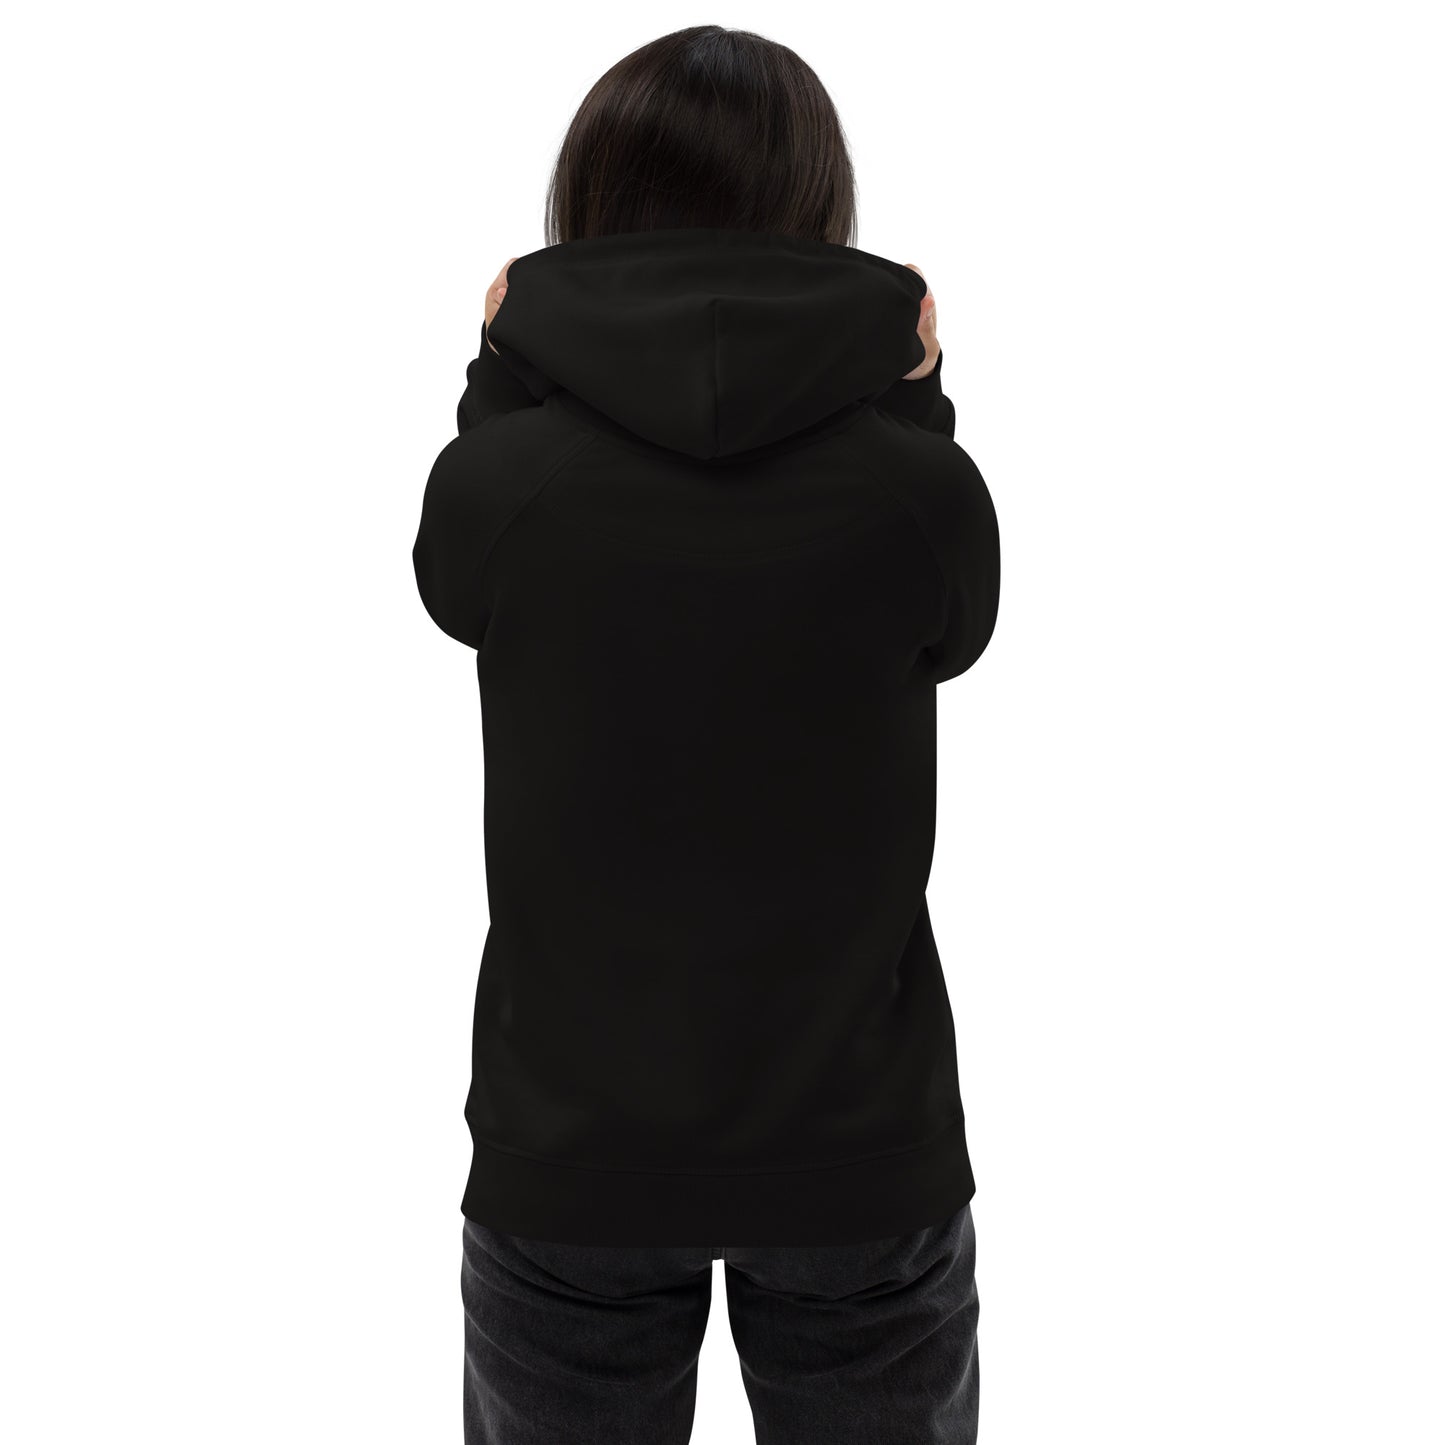 Unisex pullover hoodie - Steppin Into Black History Month